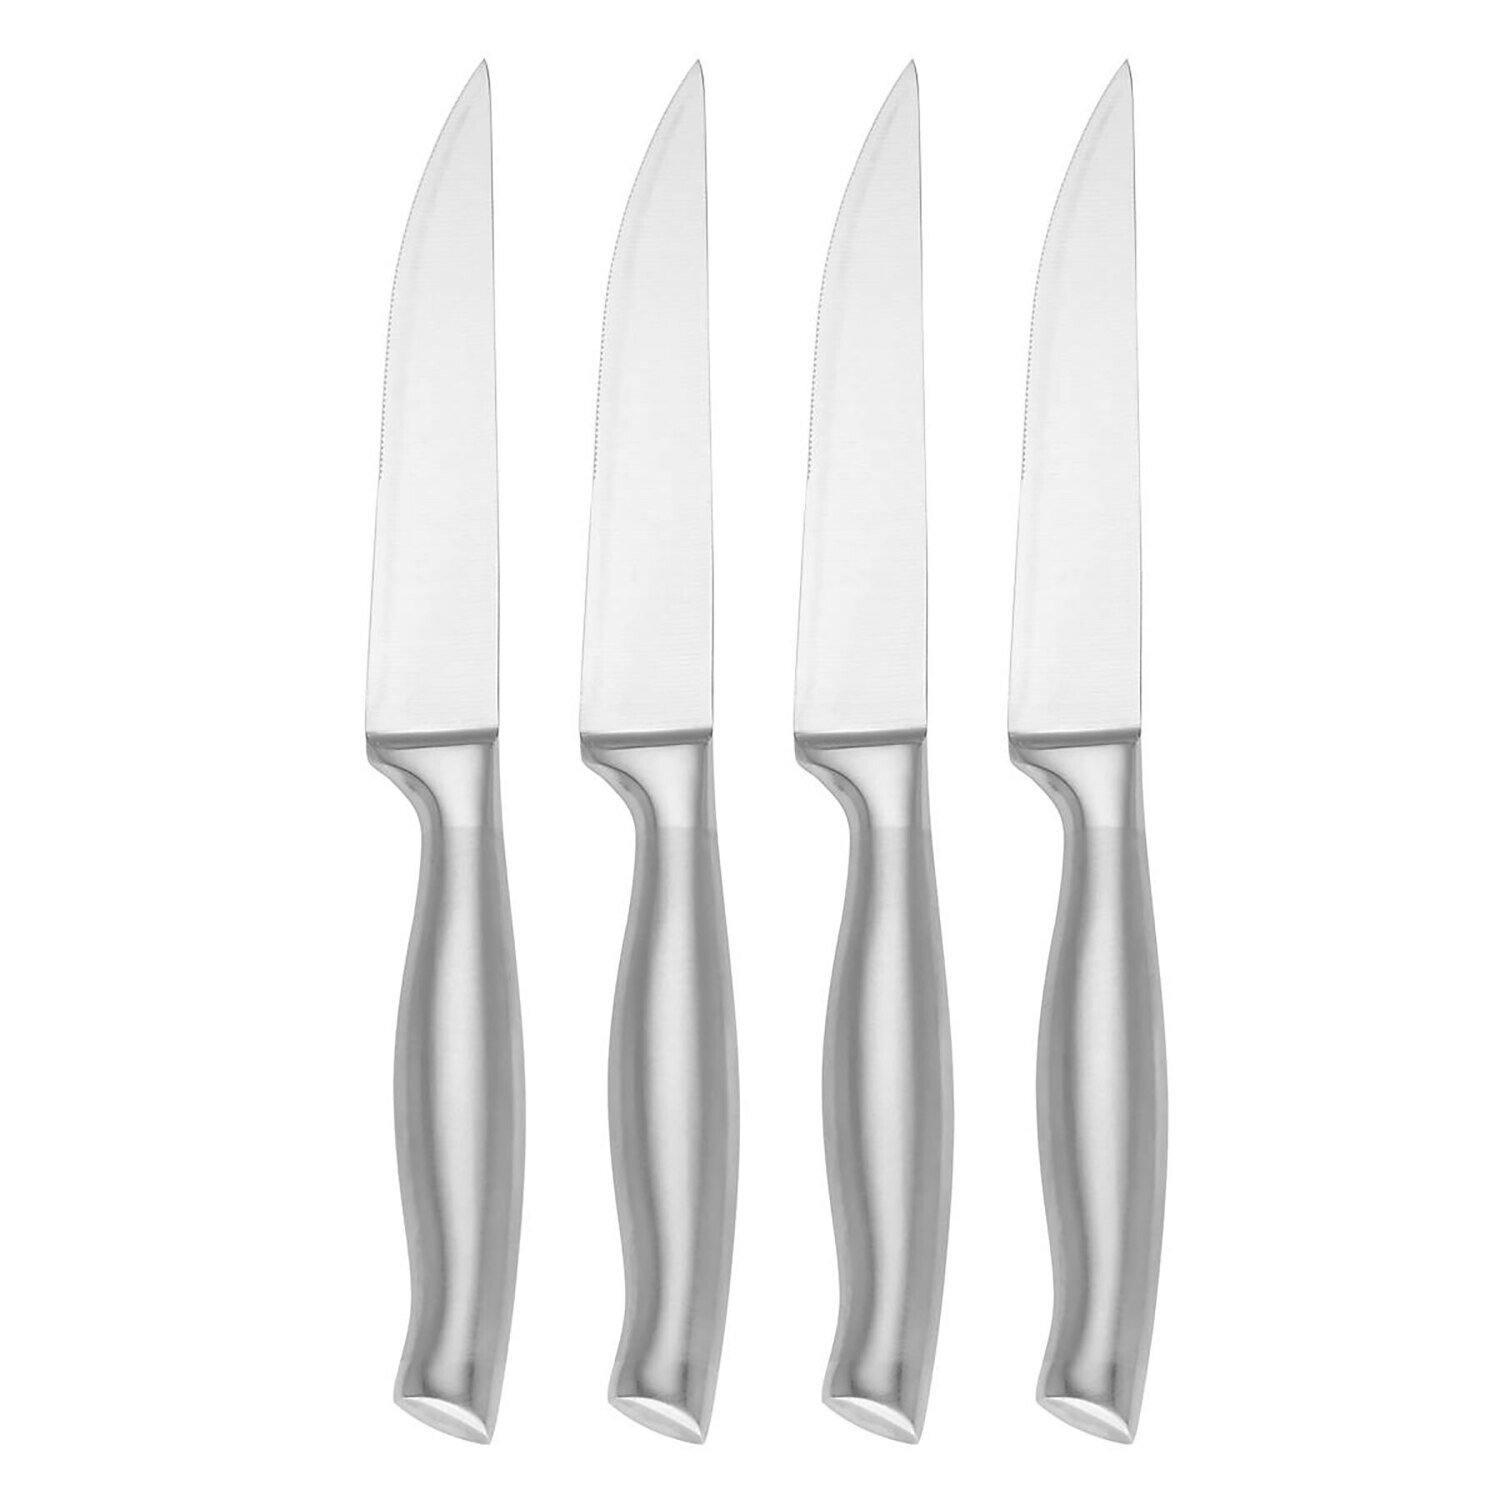 Reed and Barton Chesterfield Flatware Steak Knife Set of 4 890391